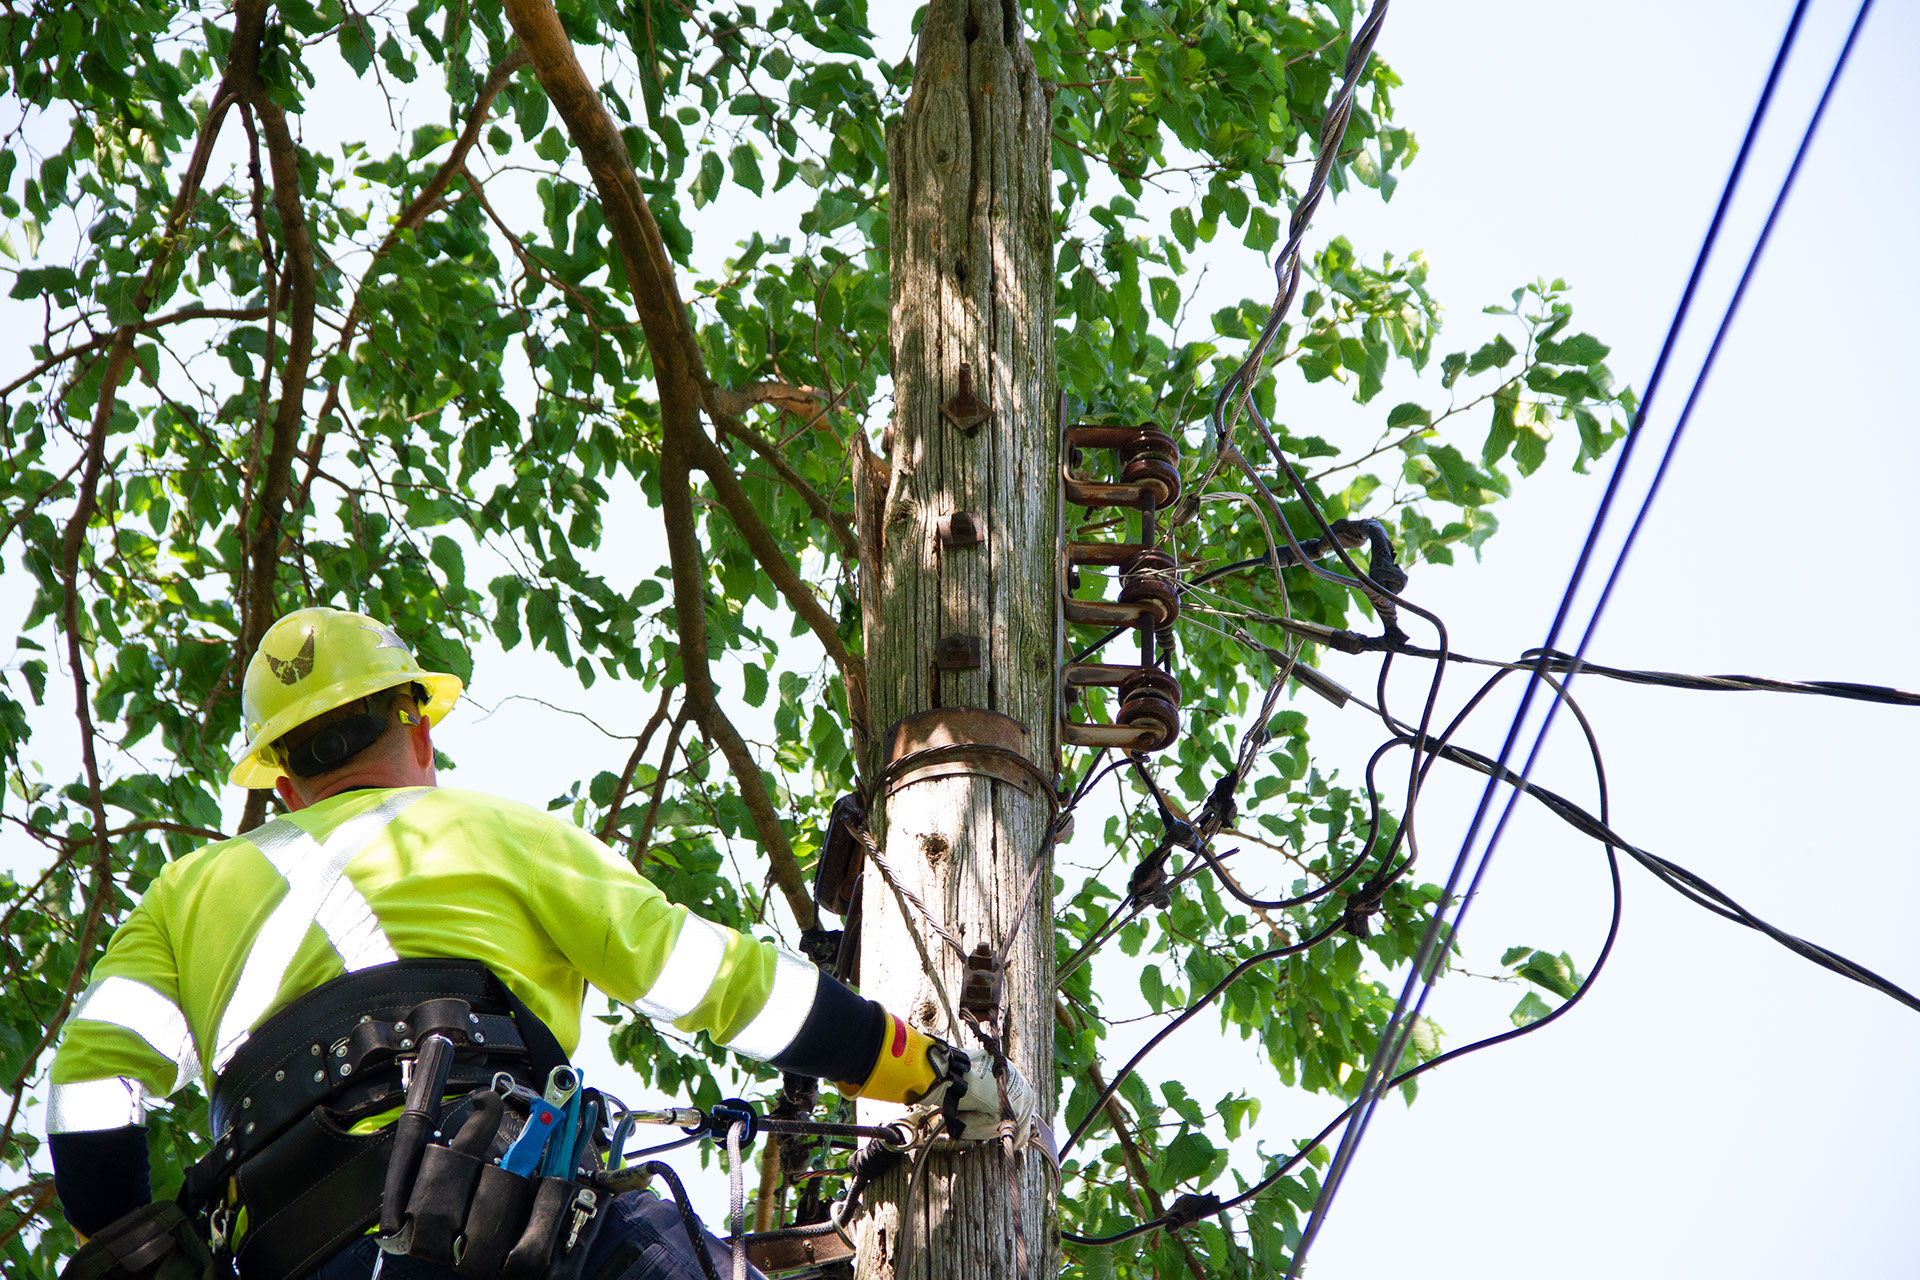 Lineman in high-vis clothing and a hard hat climbs a utility pole.